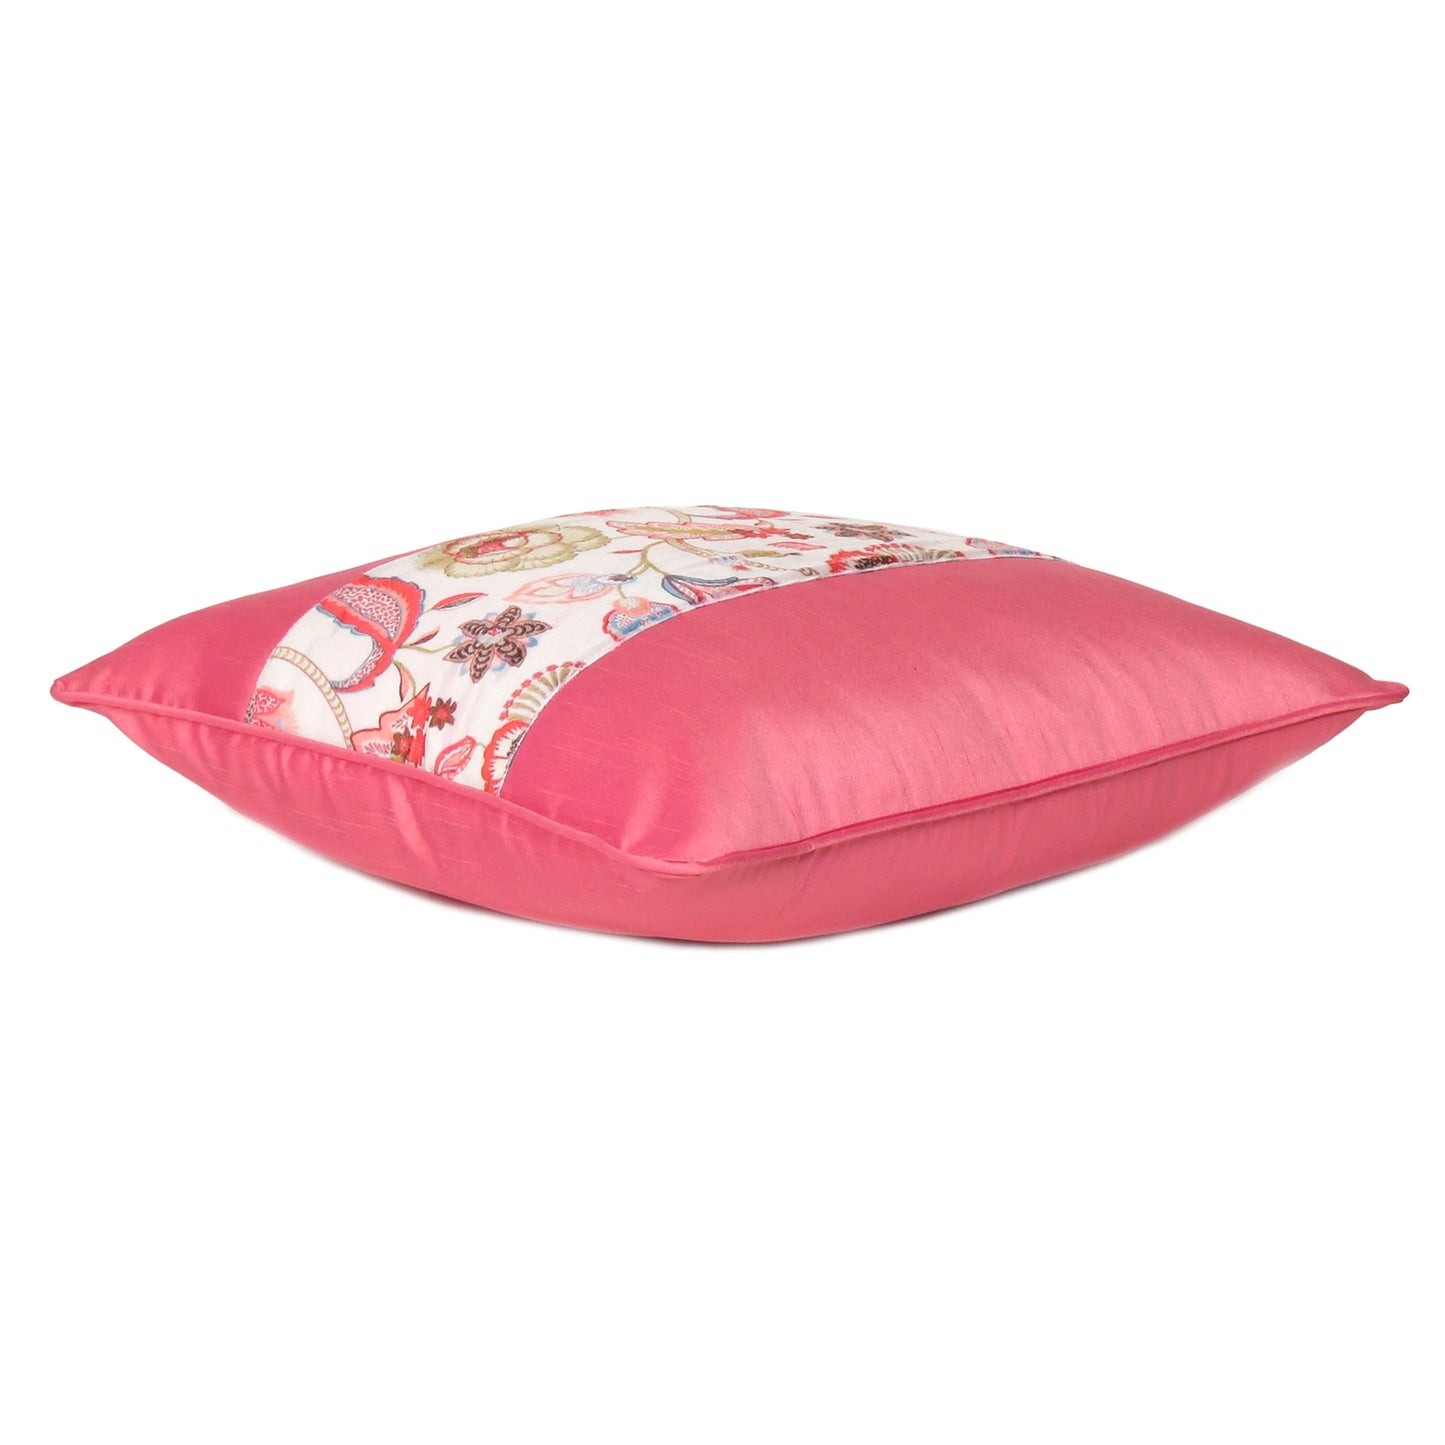 Velvet Polydupion Decorative Printed Cushion Cases in Set of 2 - Pink